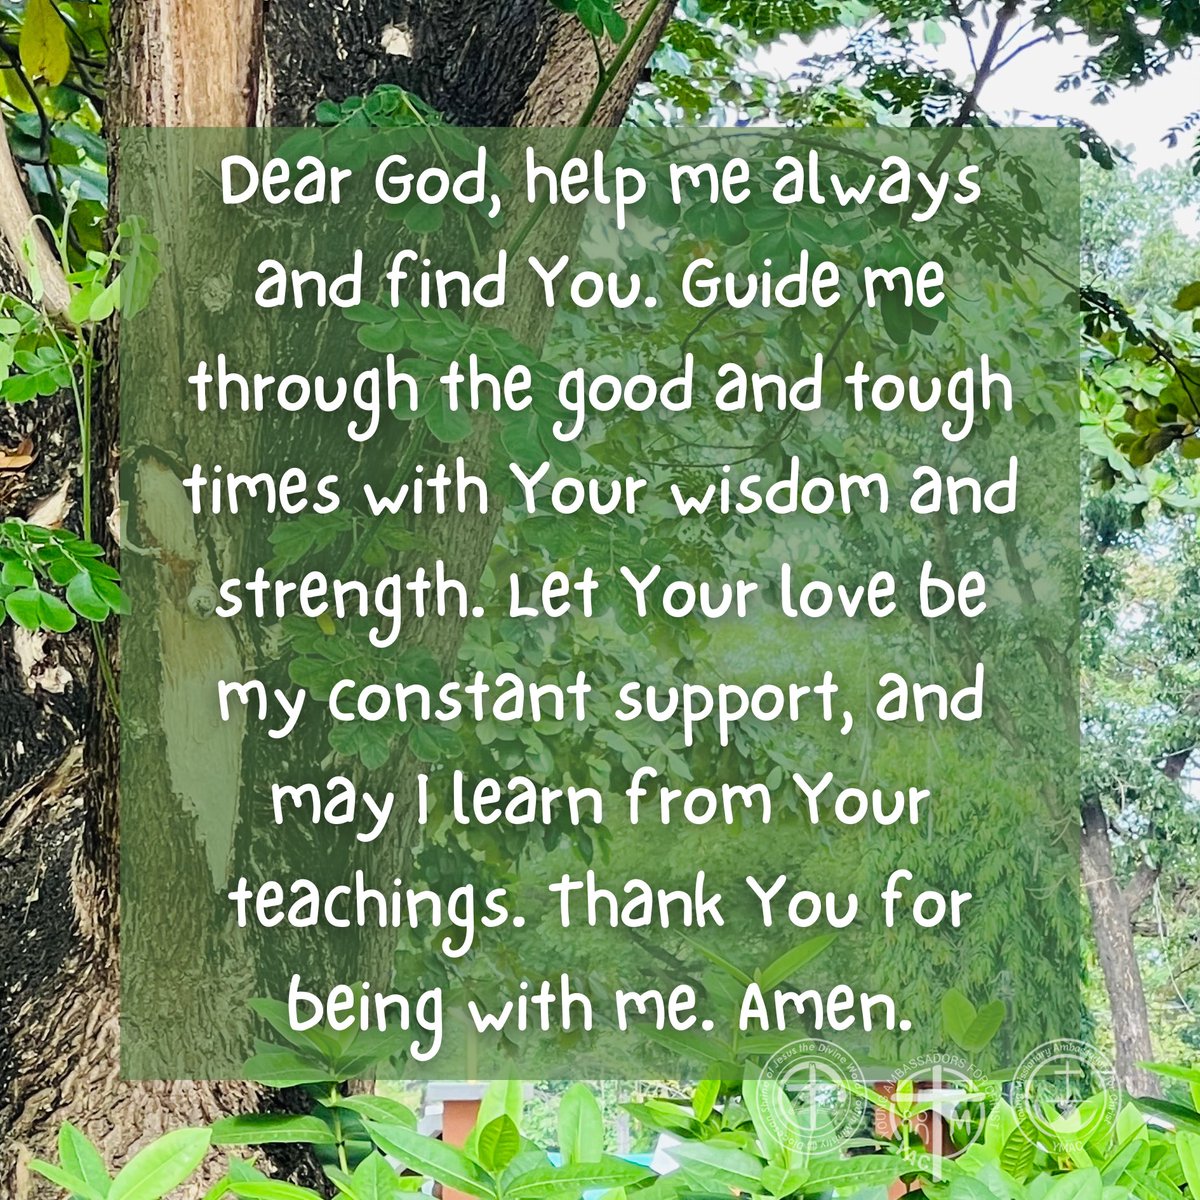 Let Your love be my constant support, and may I learn from Your teachings. Thank You for being with me. Amen.

#SeekingGod #GuidanceInFaith #StrengthInChallenges #DivineLove #WisdomFromAbove #GratefulHeart

***

#YAC #YMAC #SYM #SVDyouth 
#SHRINEyouthMinistry #ShrineYouth